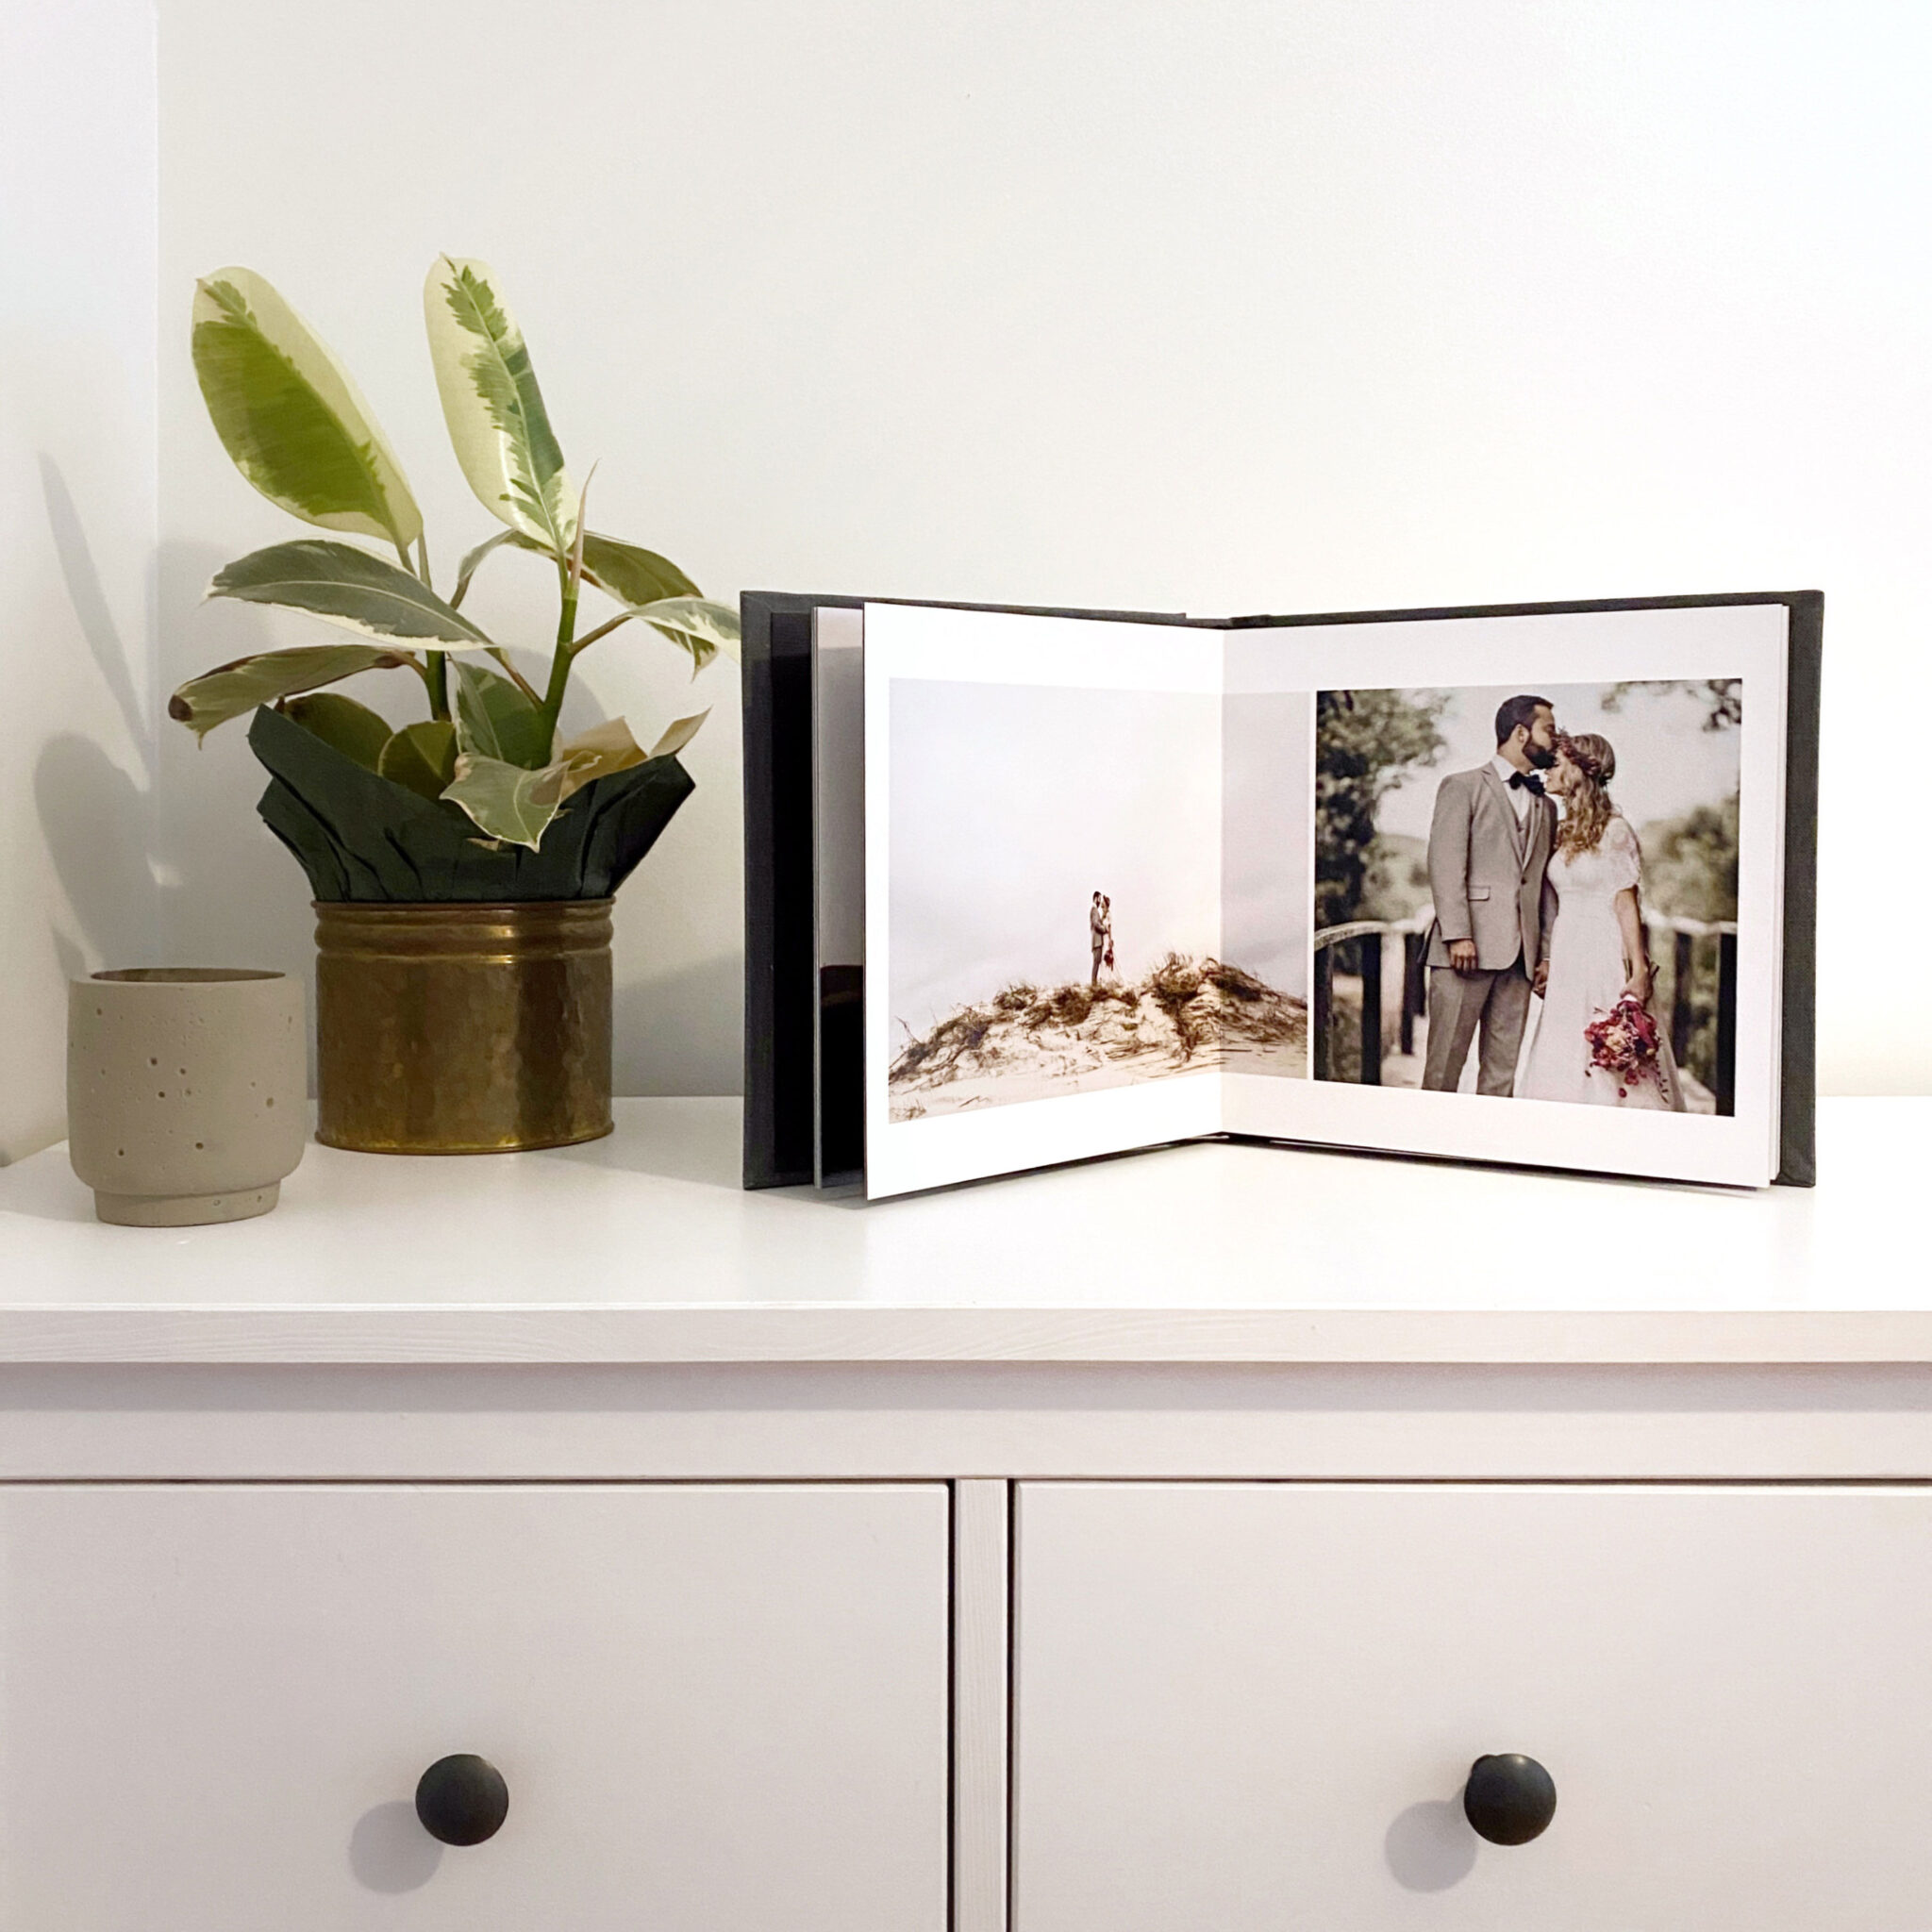 hand crafted quality photo albums by lifethreads albums by D&R Photo in Canada